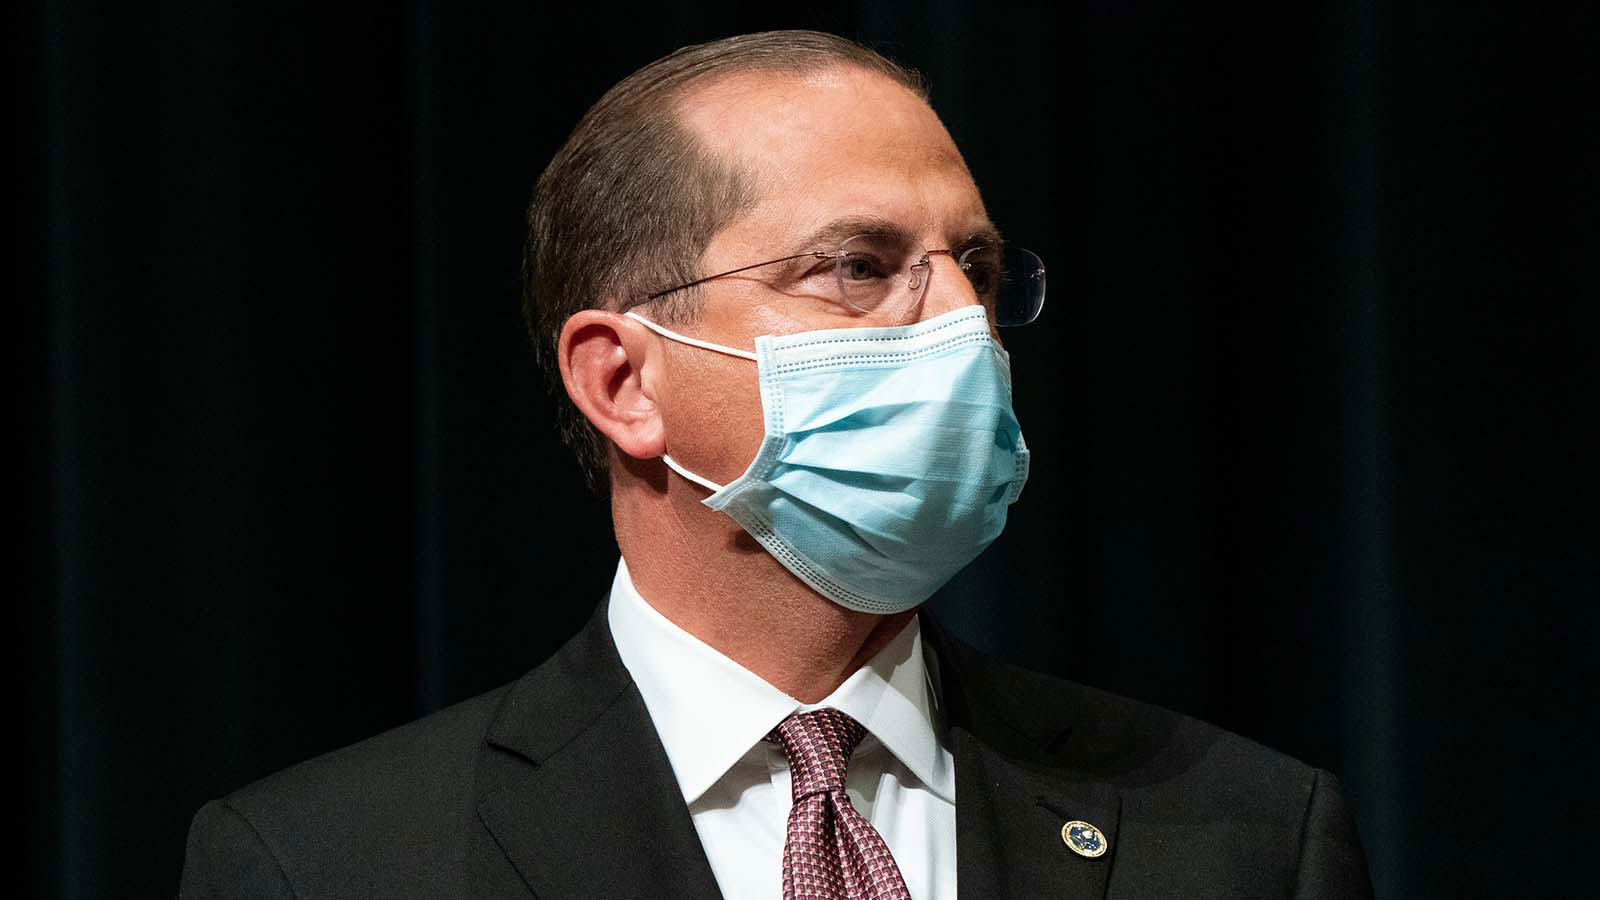 Alex Azar, secretary of Health and Human Services, listens during a news conference at the CDC Roybal Campus in Atlanta, on Wednesday, Oct. 21.